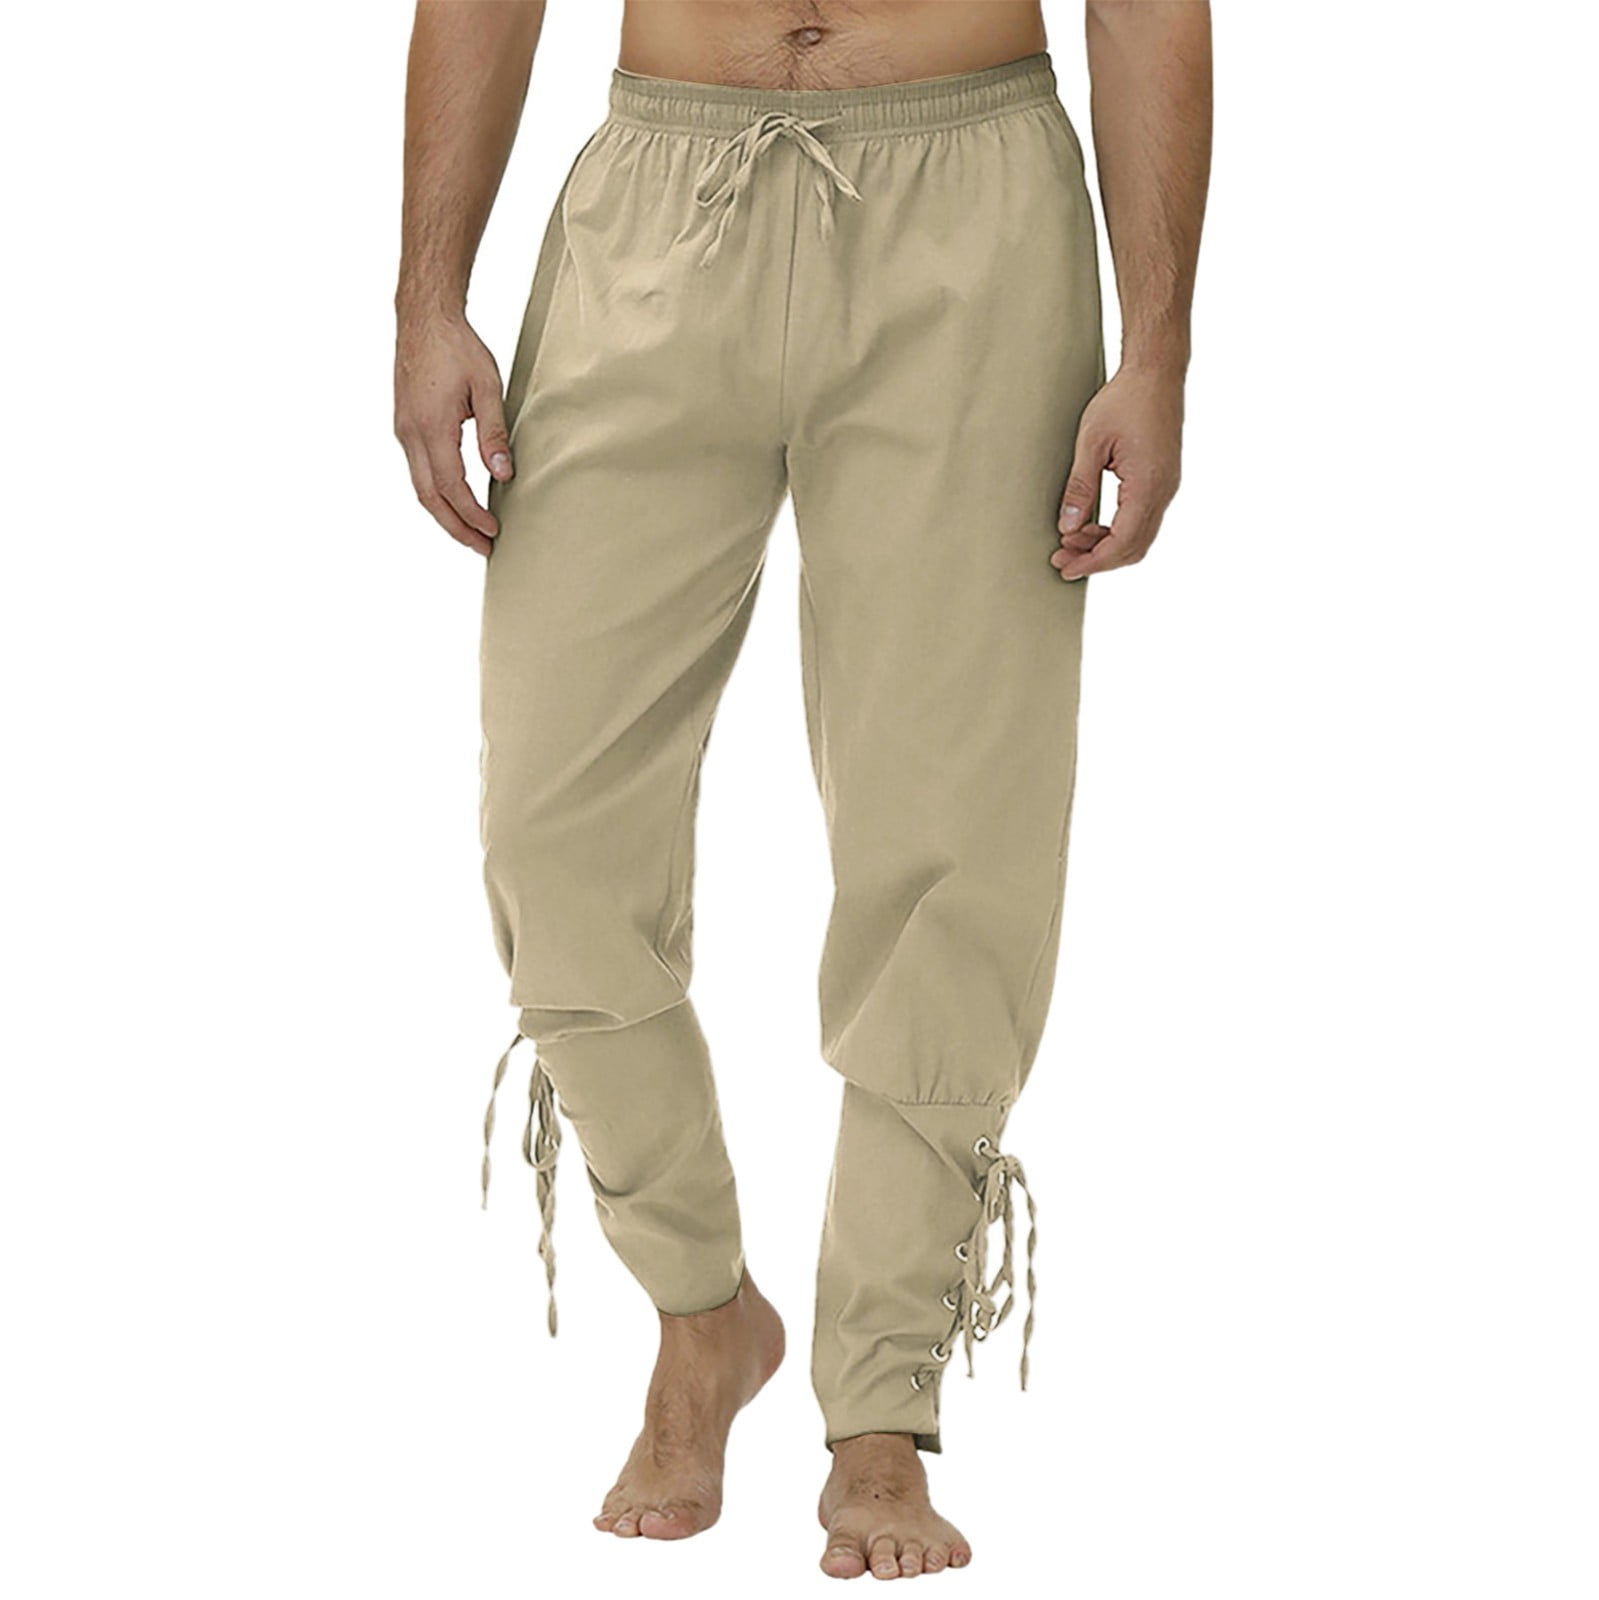 Mens Sweatpants Open Bottom Cotton Ankle Banded Pants With